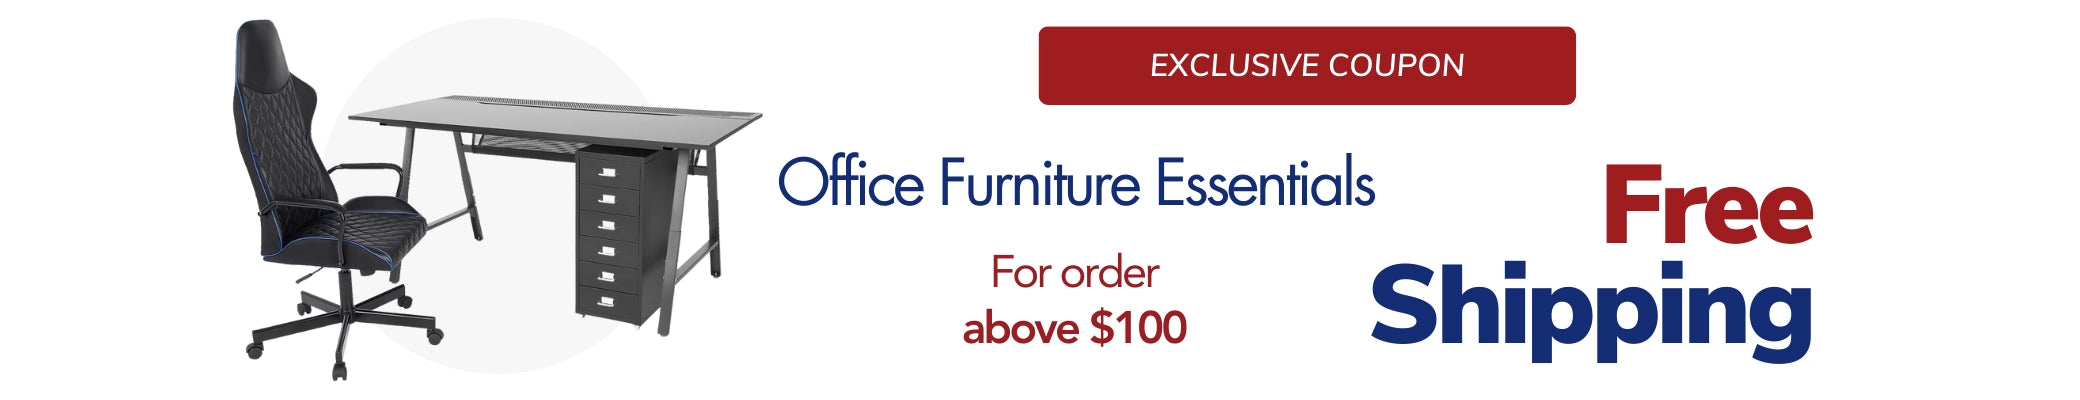 Chair, desks and more furniture essentials for your office. Free Shipping for Orders above 100